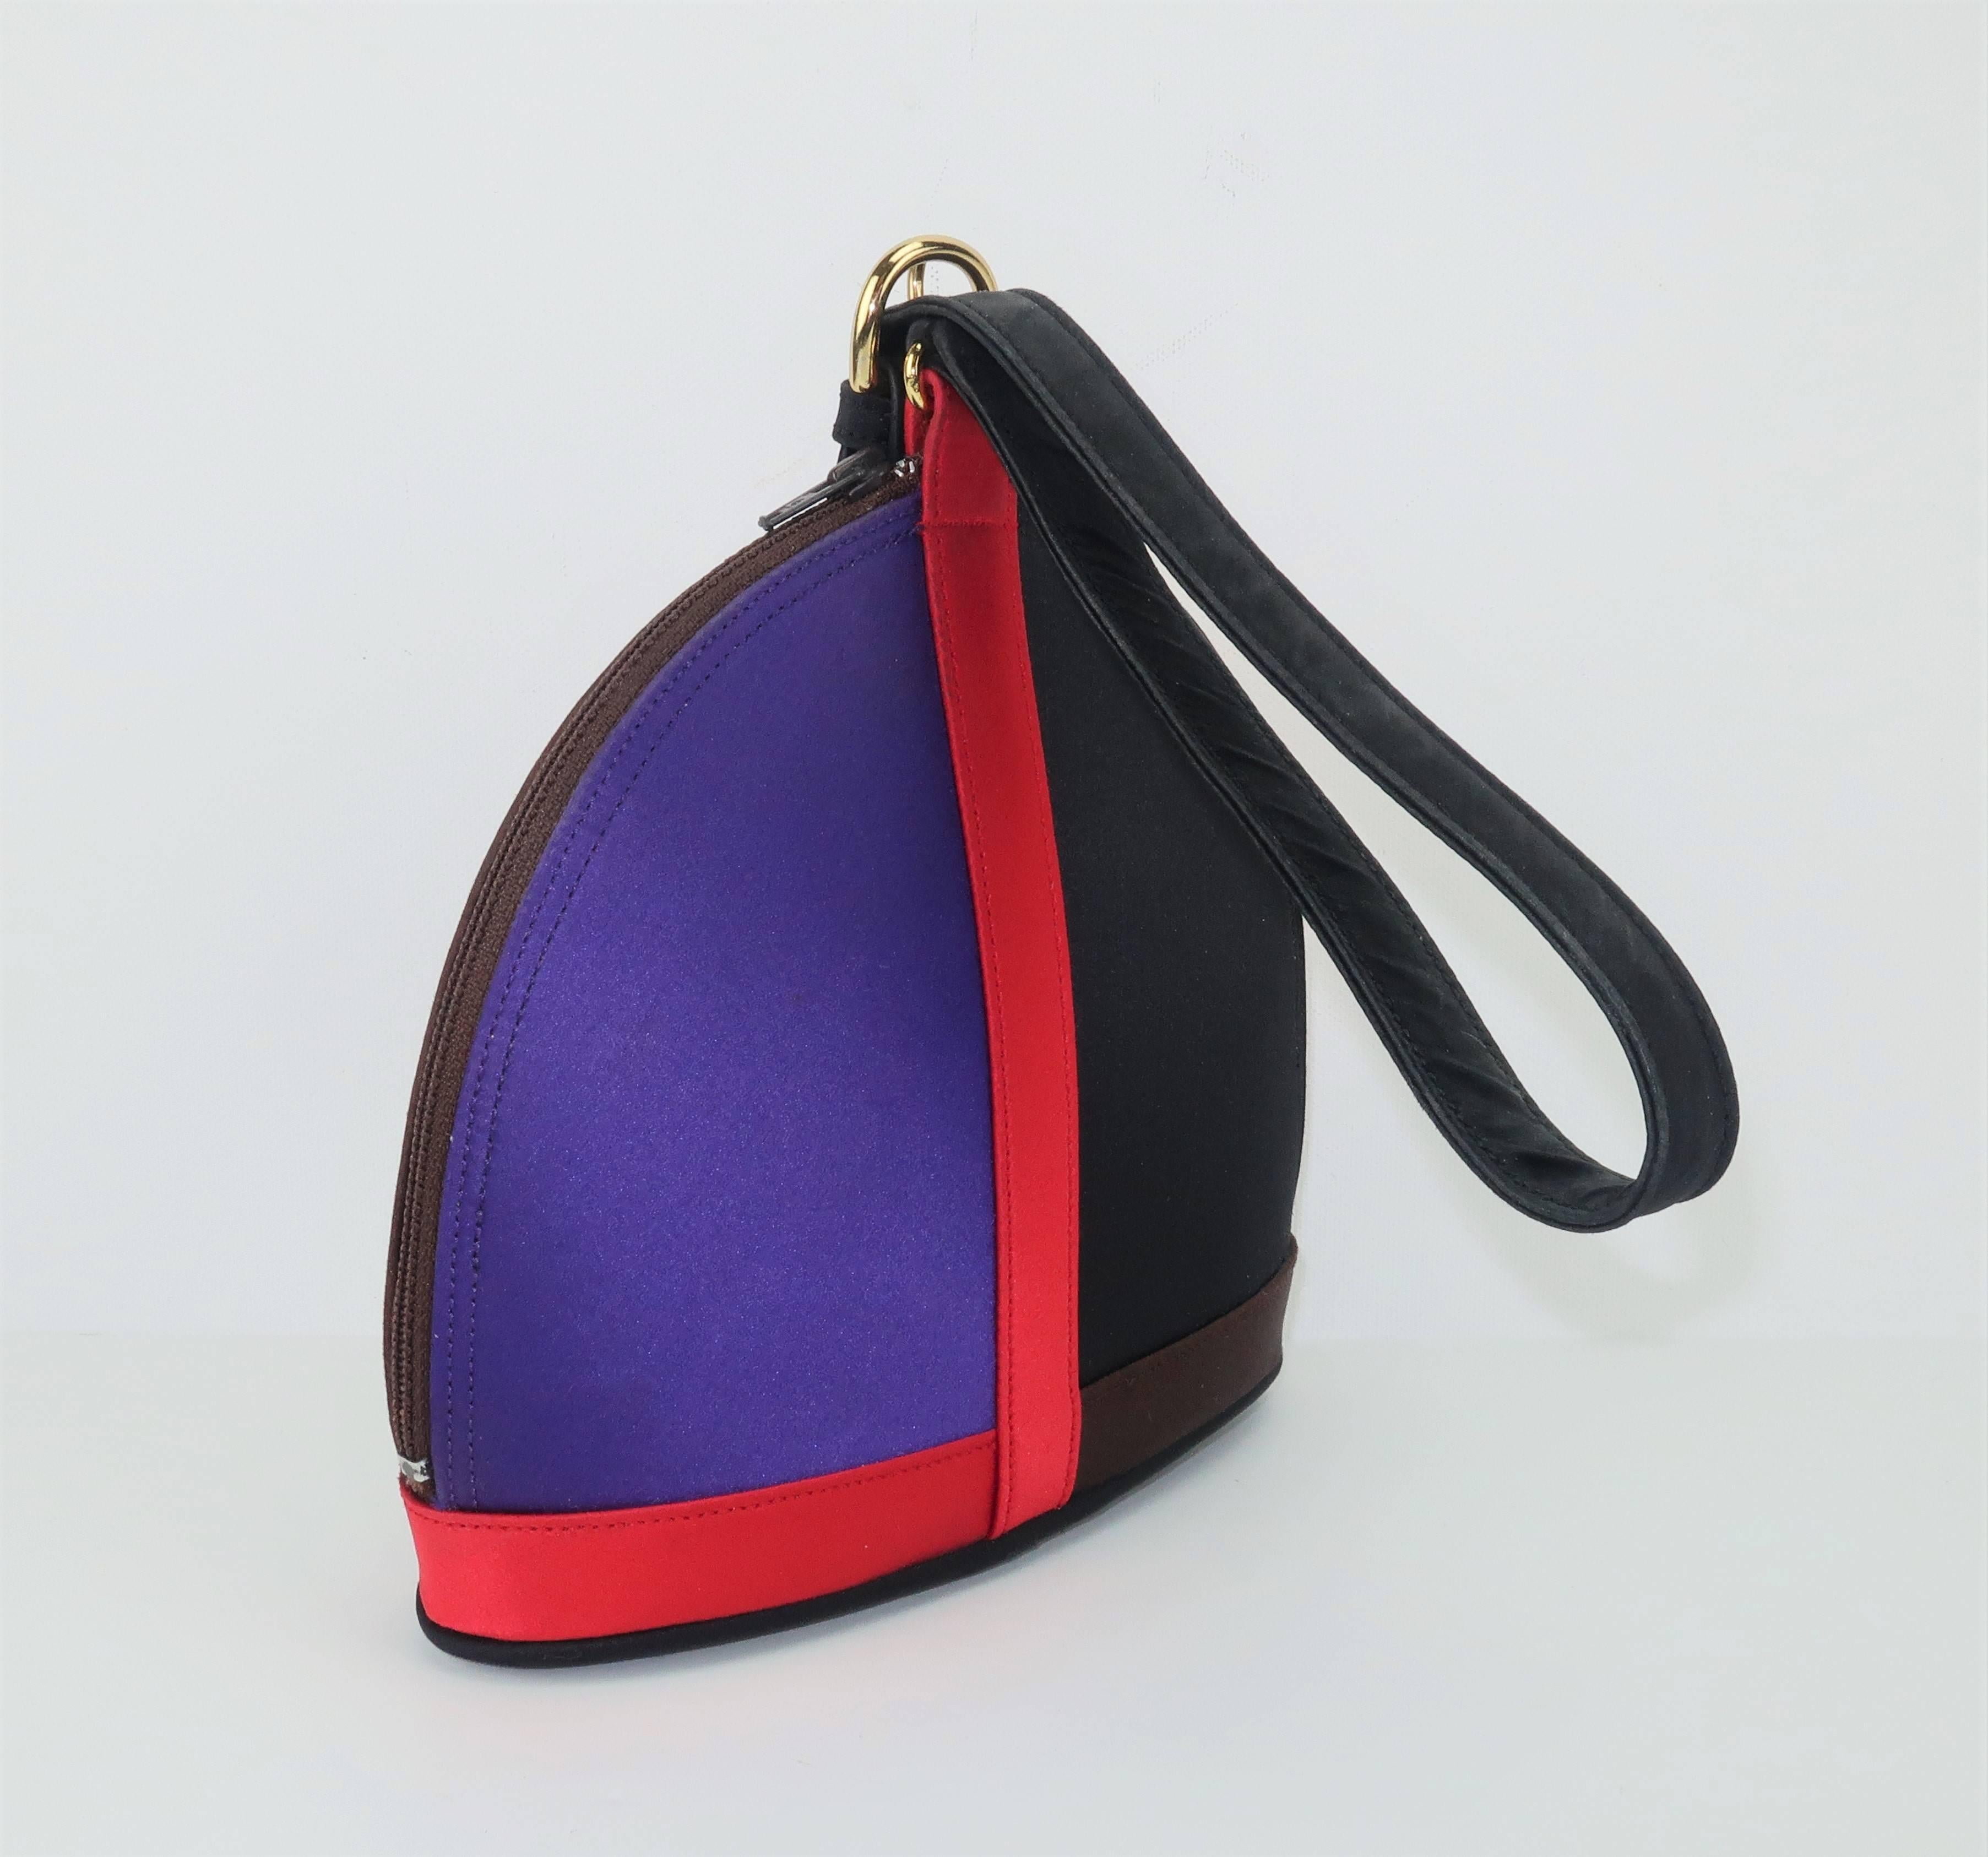 Renaud Pellegrino began his career designing handbags for Yves Saint Laurent in the 1970's.  It was a time when handbags were progressing from pure function to a stand alone fashion accessory.  He is described as a 'wizard' with form proven with